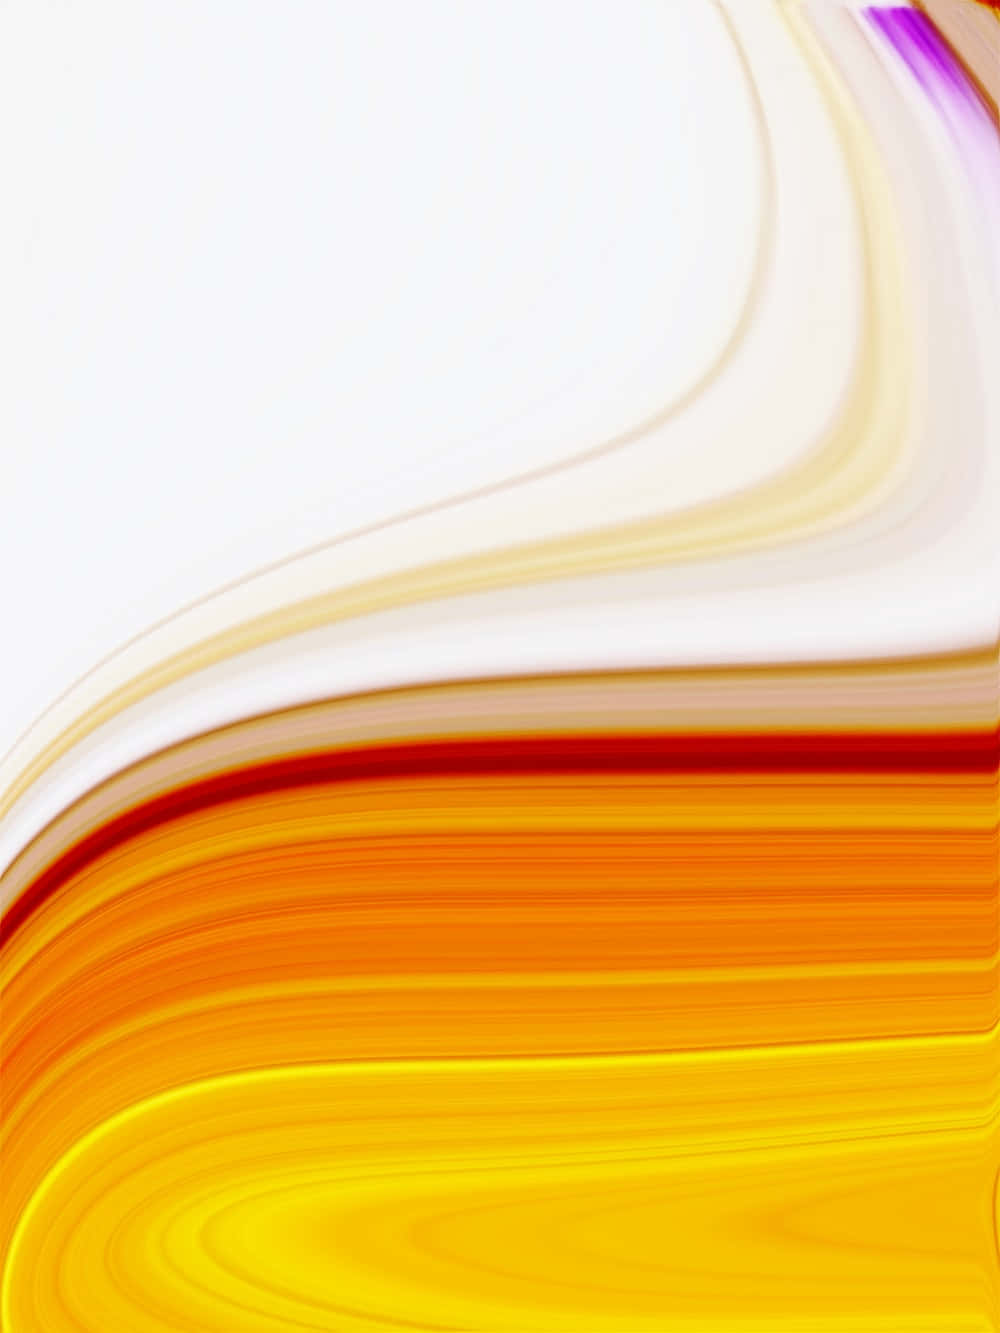 A Colorful Abstract Background With A Yellow And Orange Color